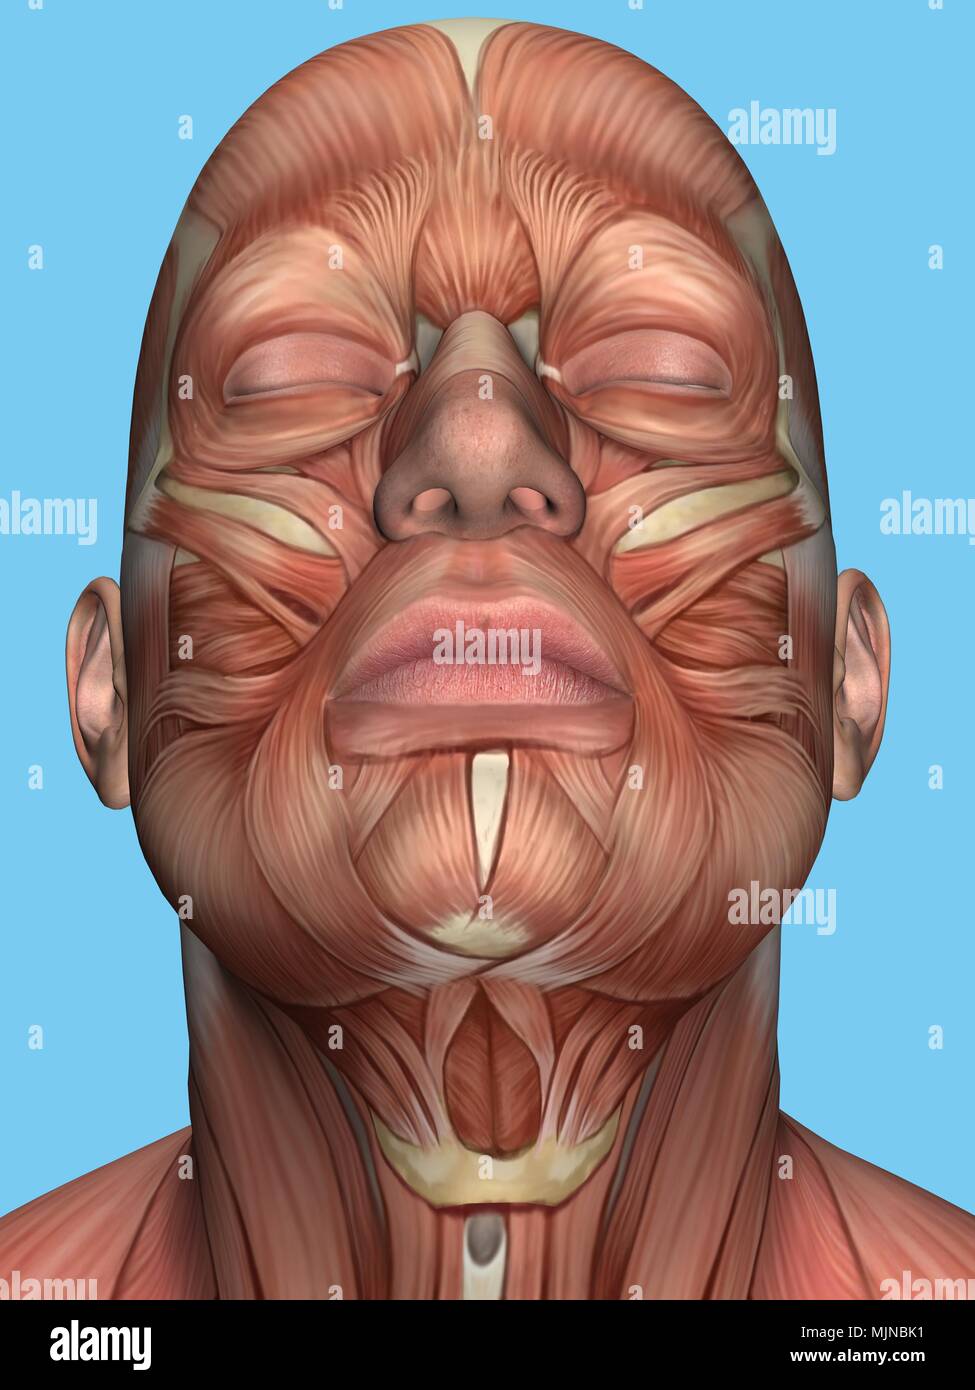 Anatomy of face and neck muscle. Stock Photo